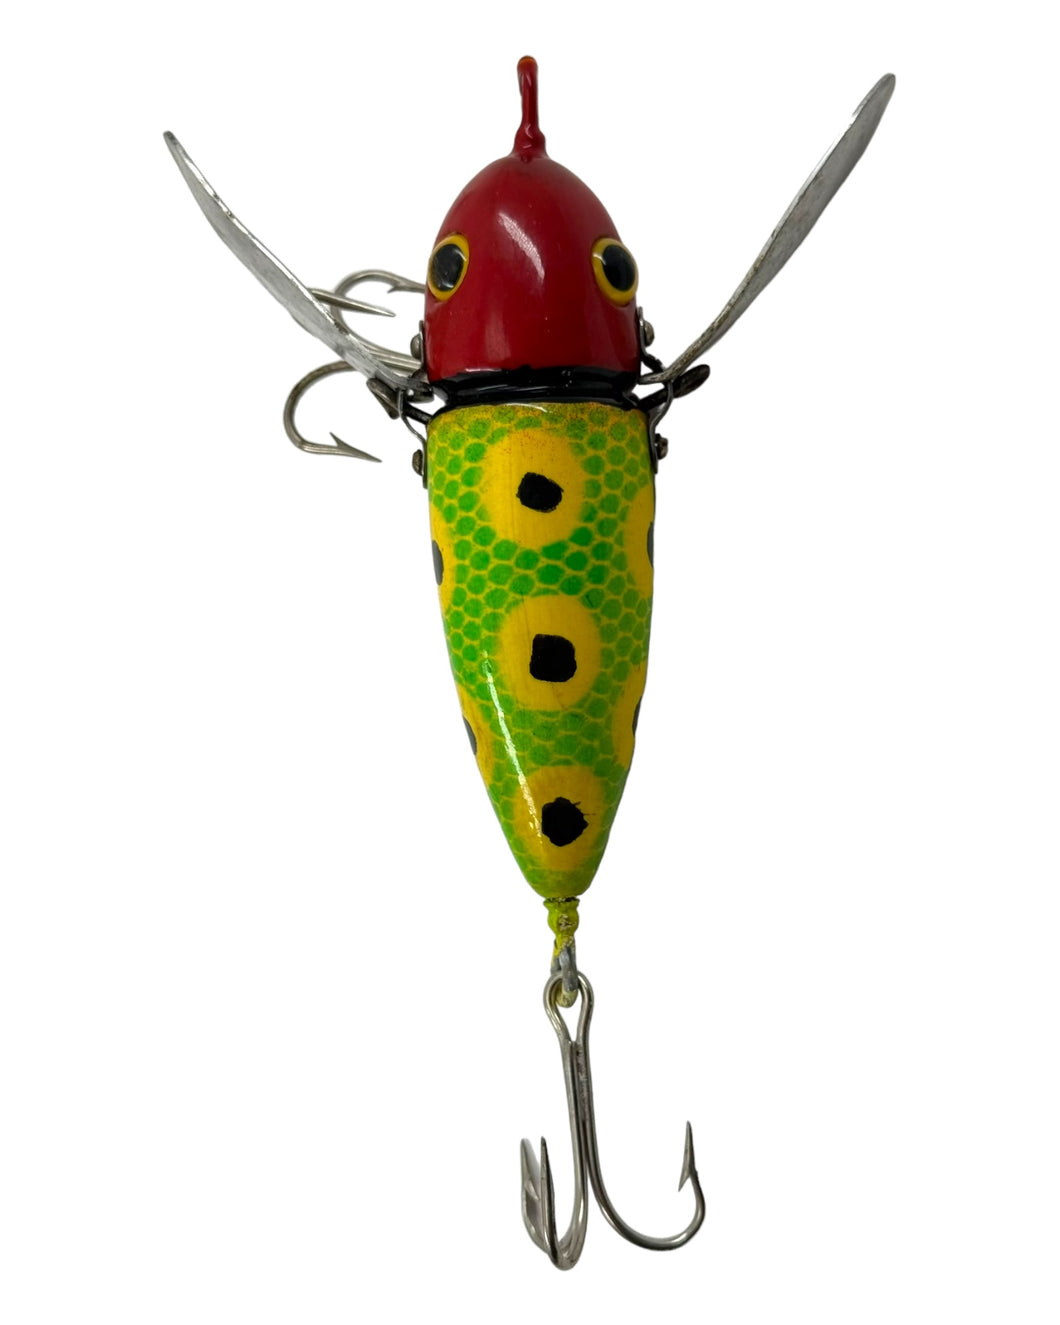 VINTAGE HEDDON CRAZY CRAWLER WOOD LURE in RED HEAD YELLOW BODY